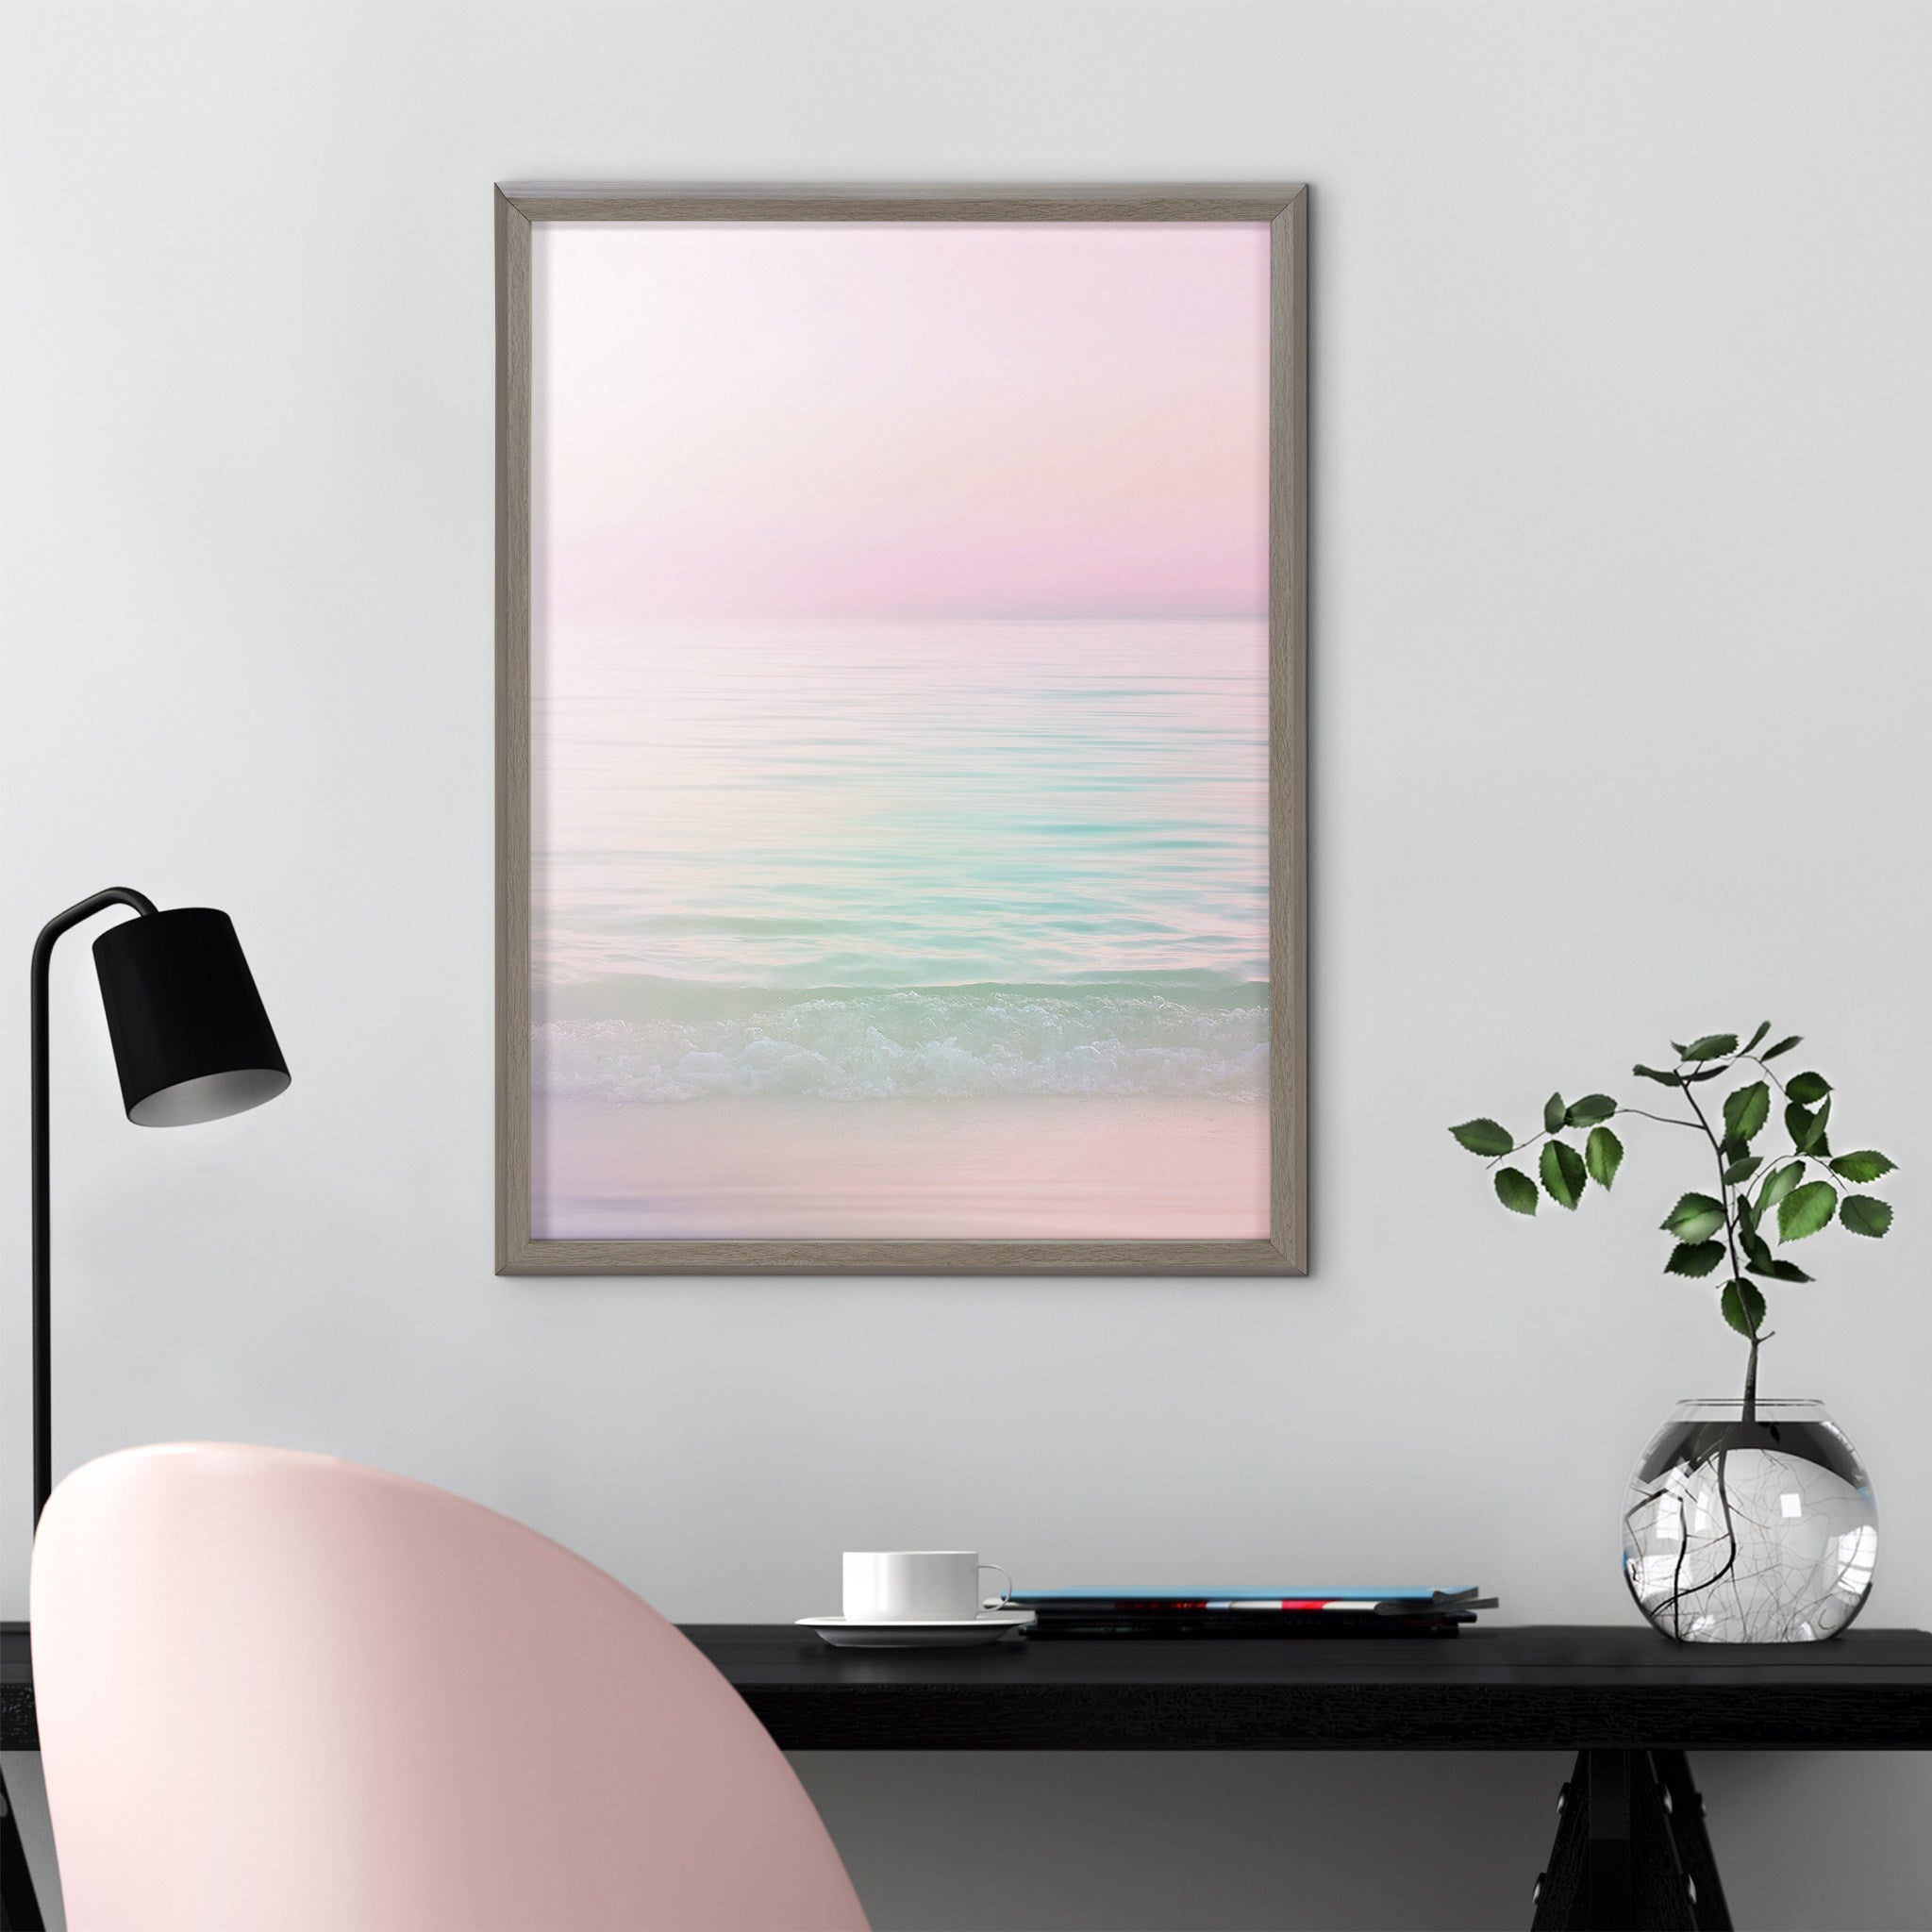 Blake Dreamy Pastel Seascape Framed Printed Glass by Dominique Vari